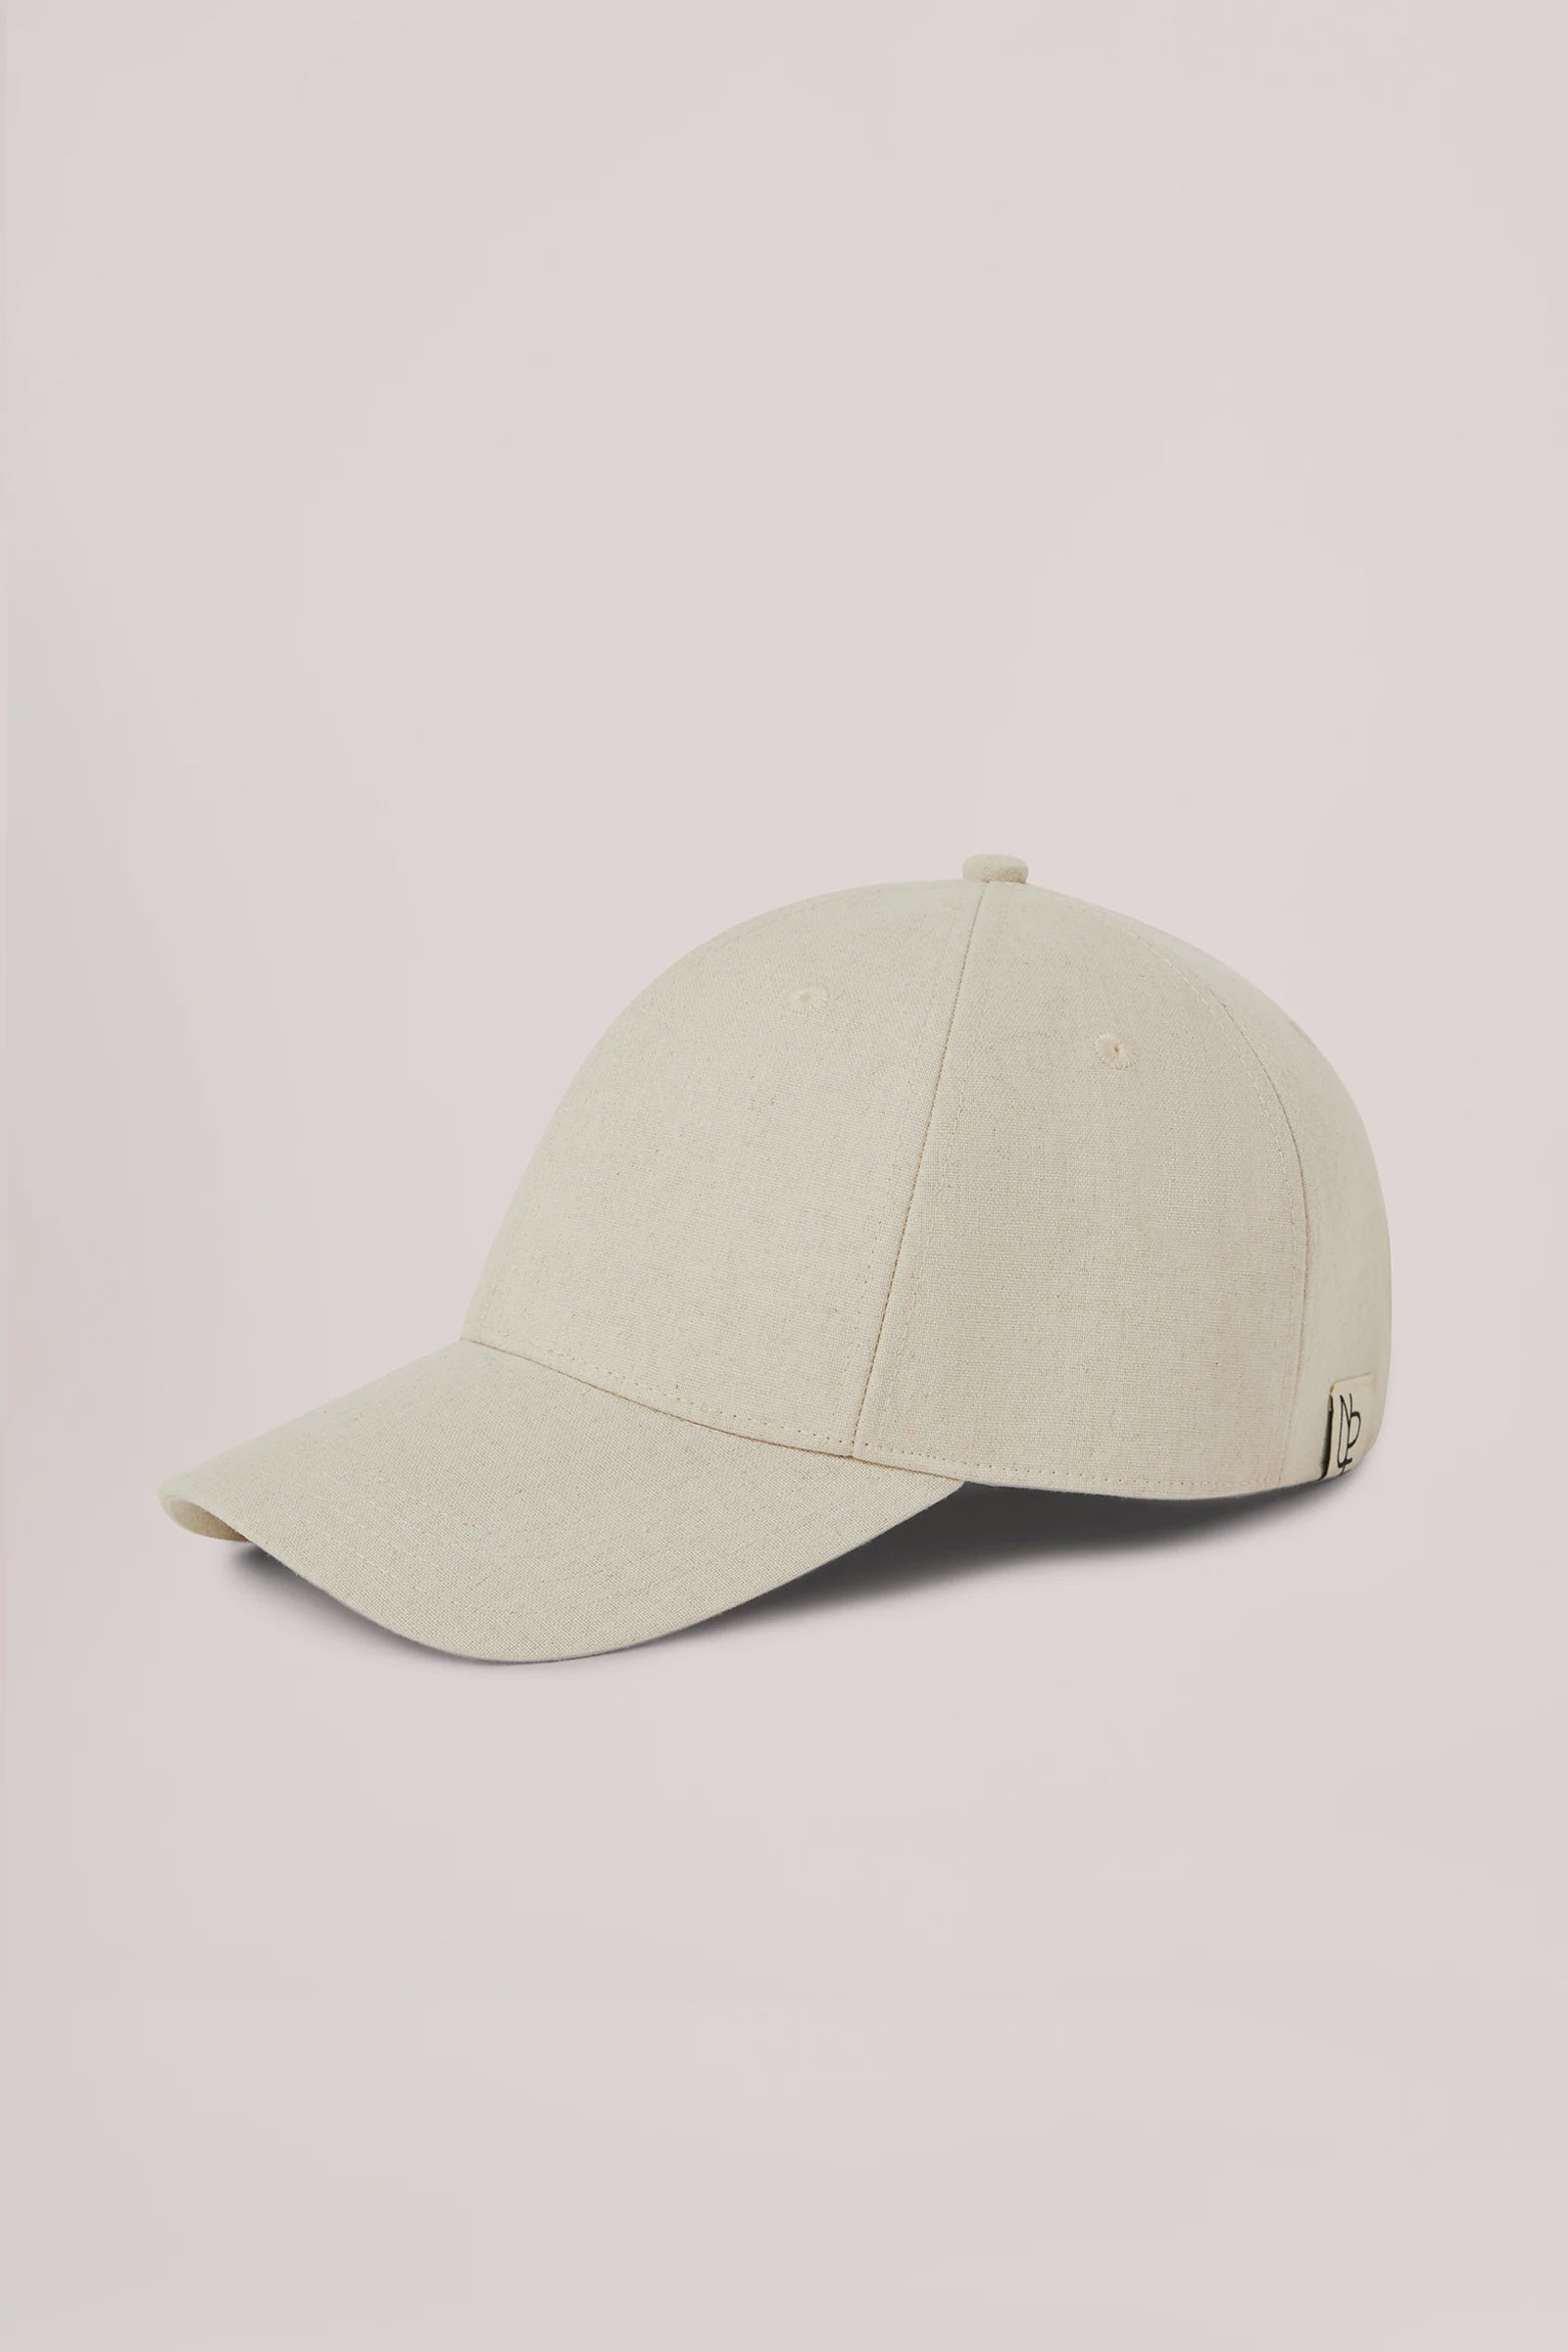 Nude Lucy | Nude Linen Cap - Natural